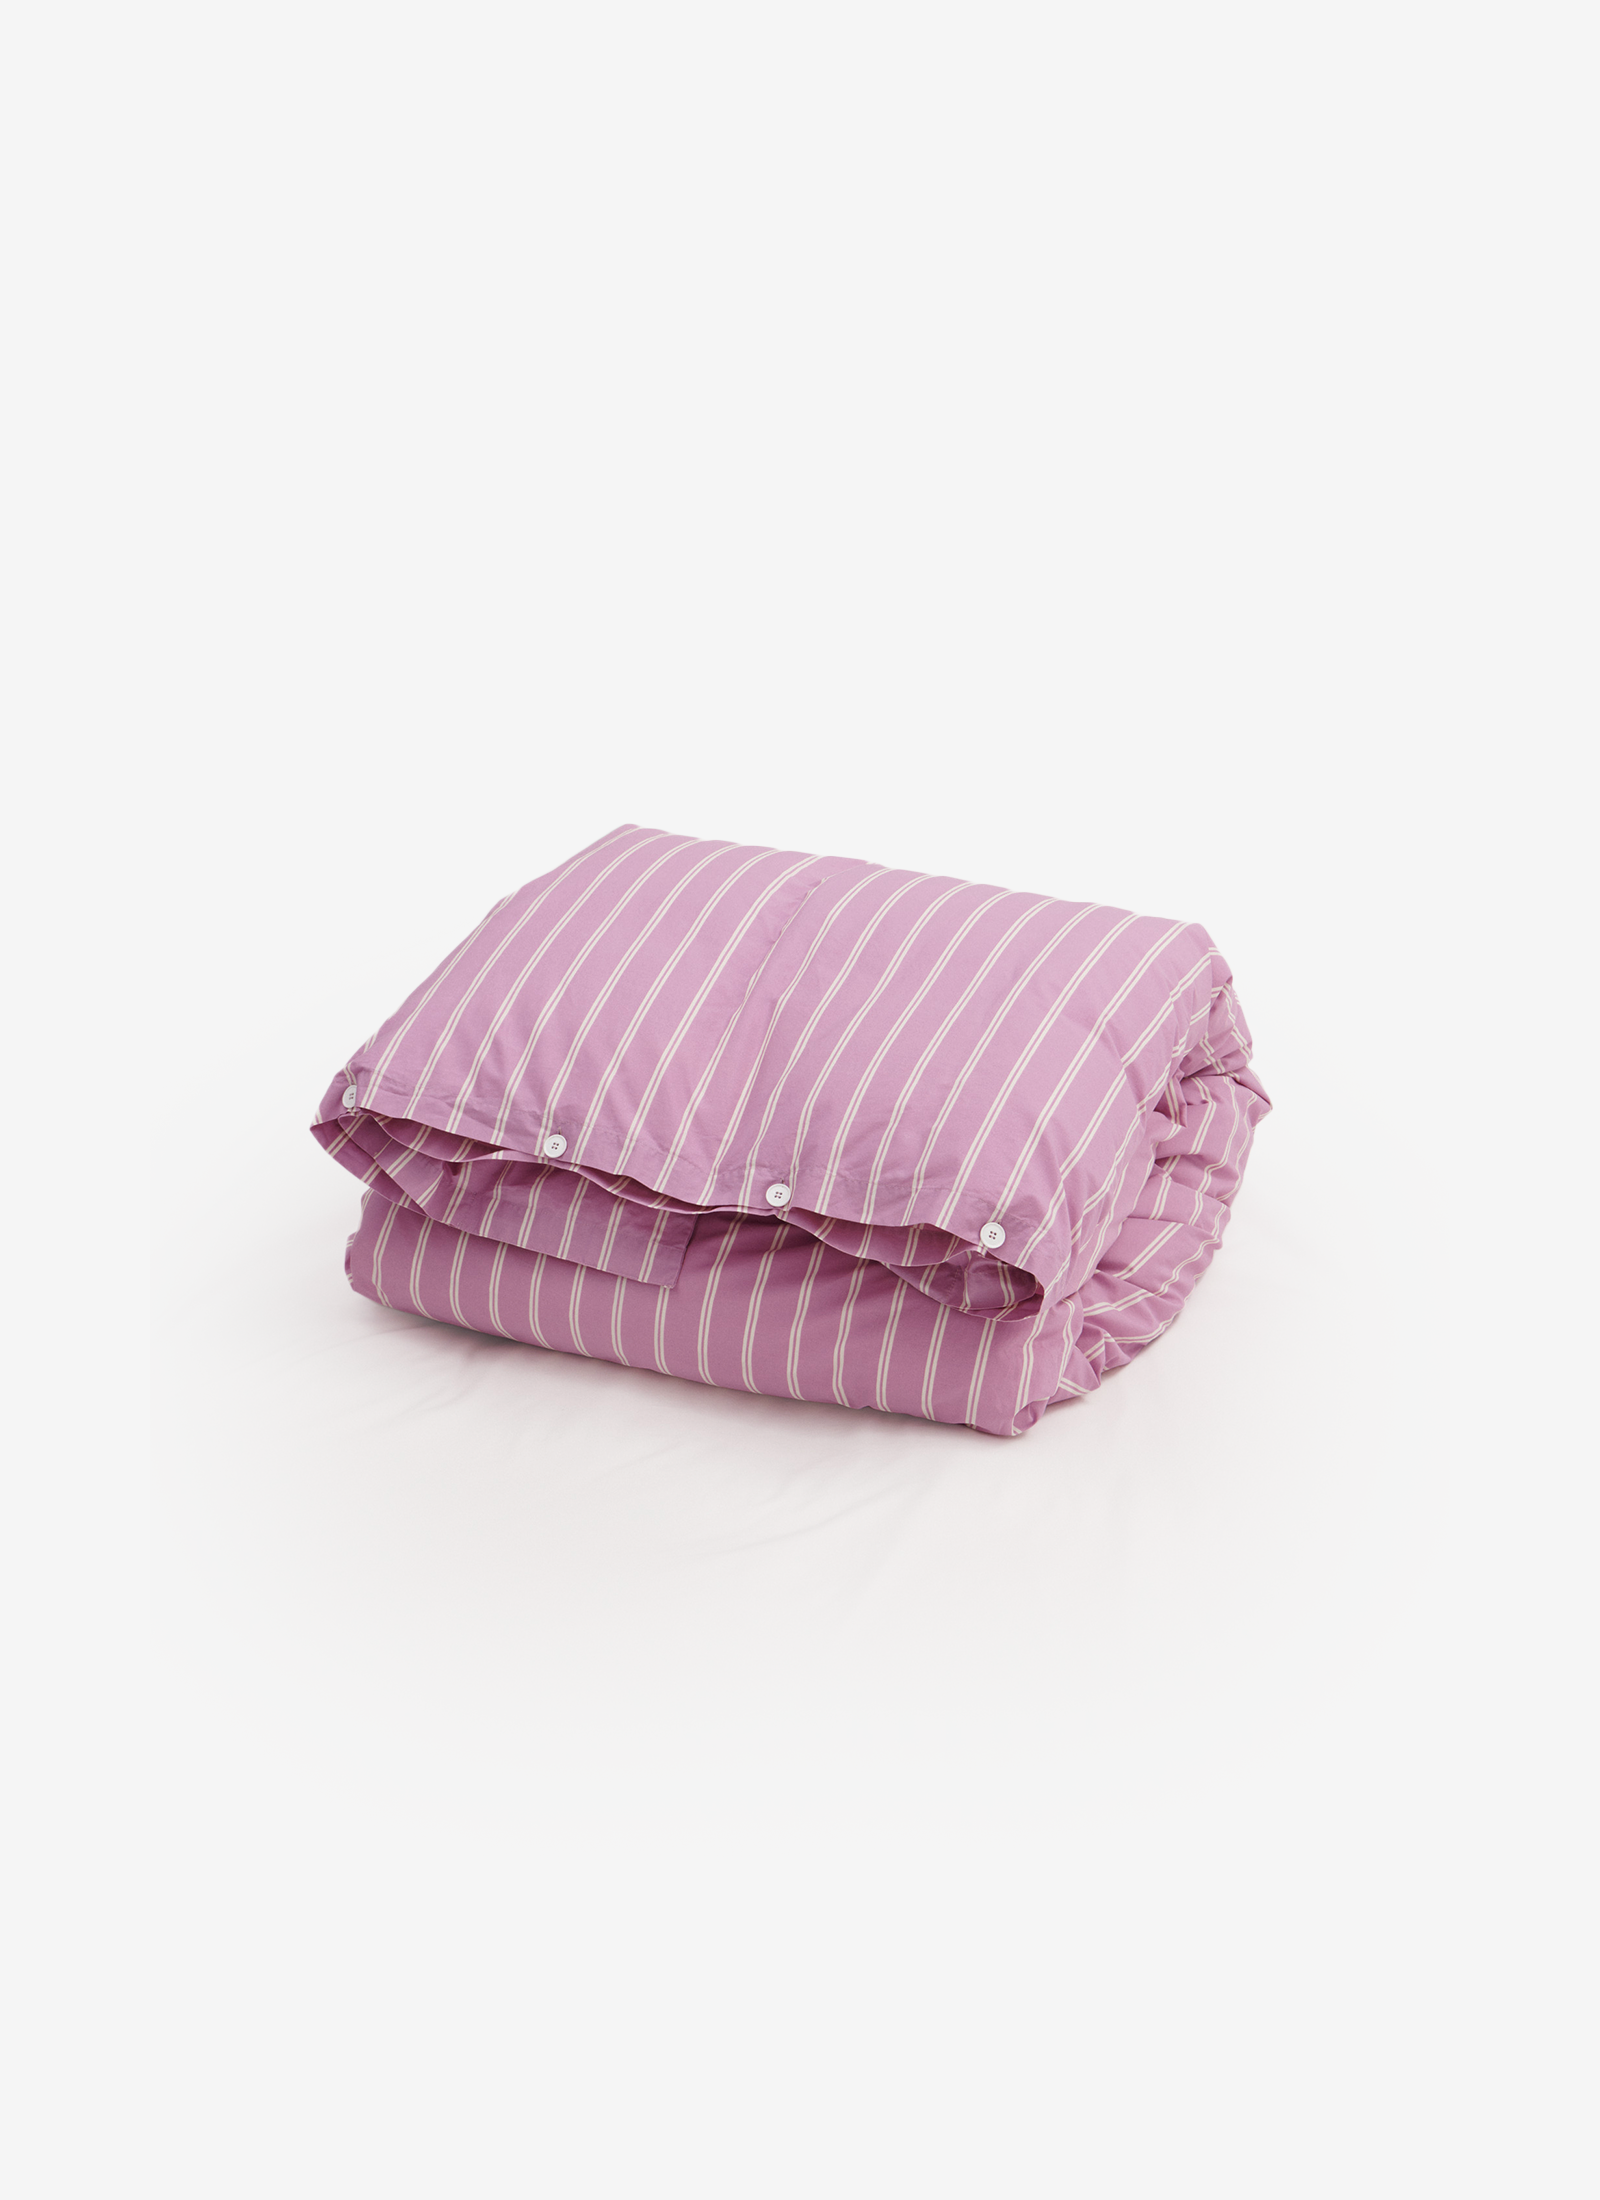 Duvet Cover in Mallow Pink Stripes